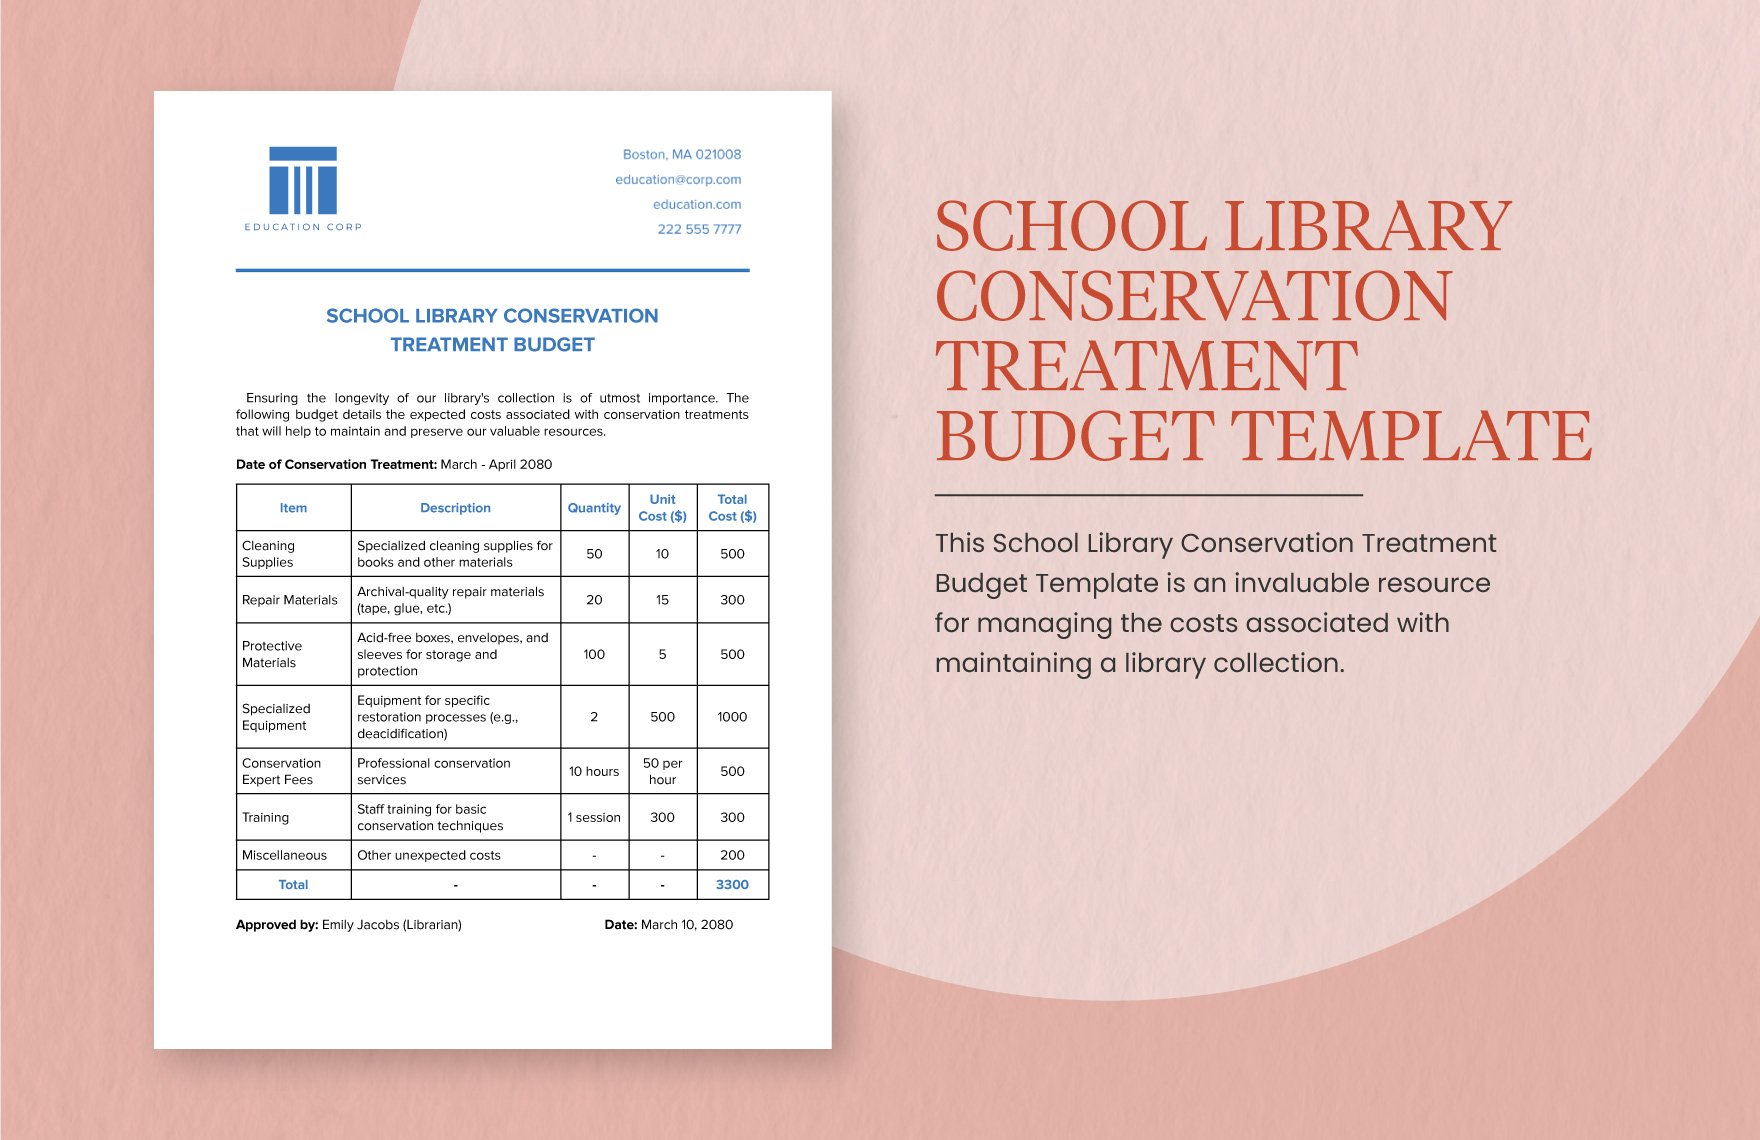 School Library Conservation Treatment Budget Template